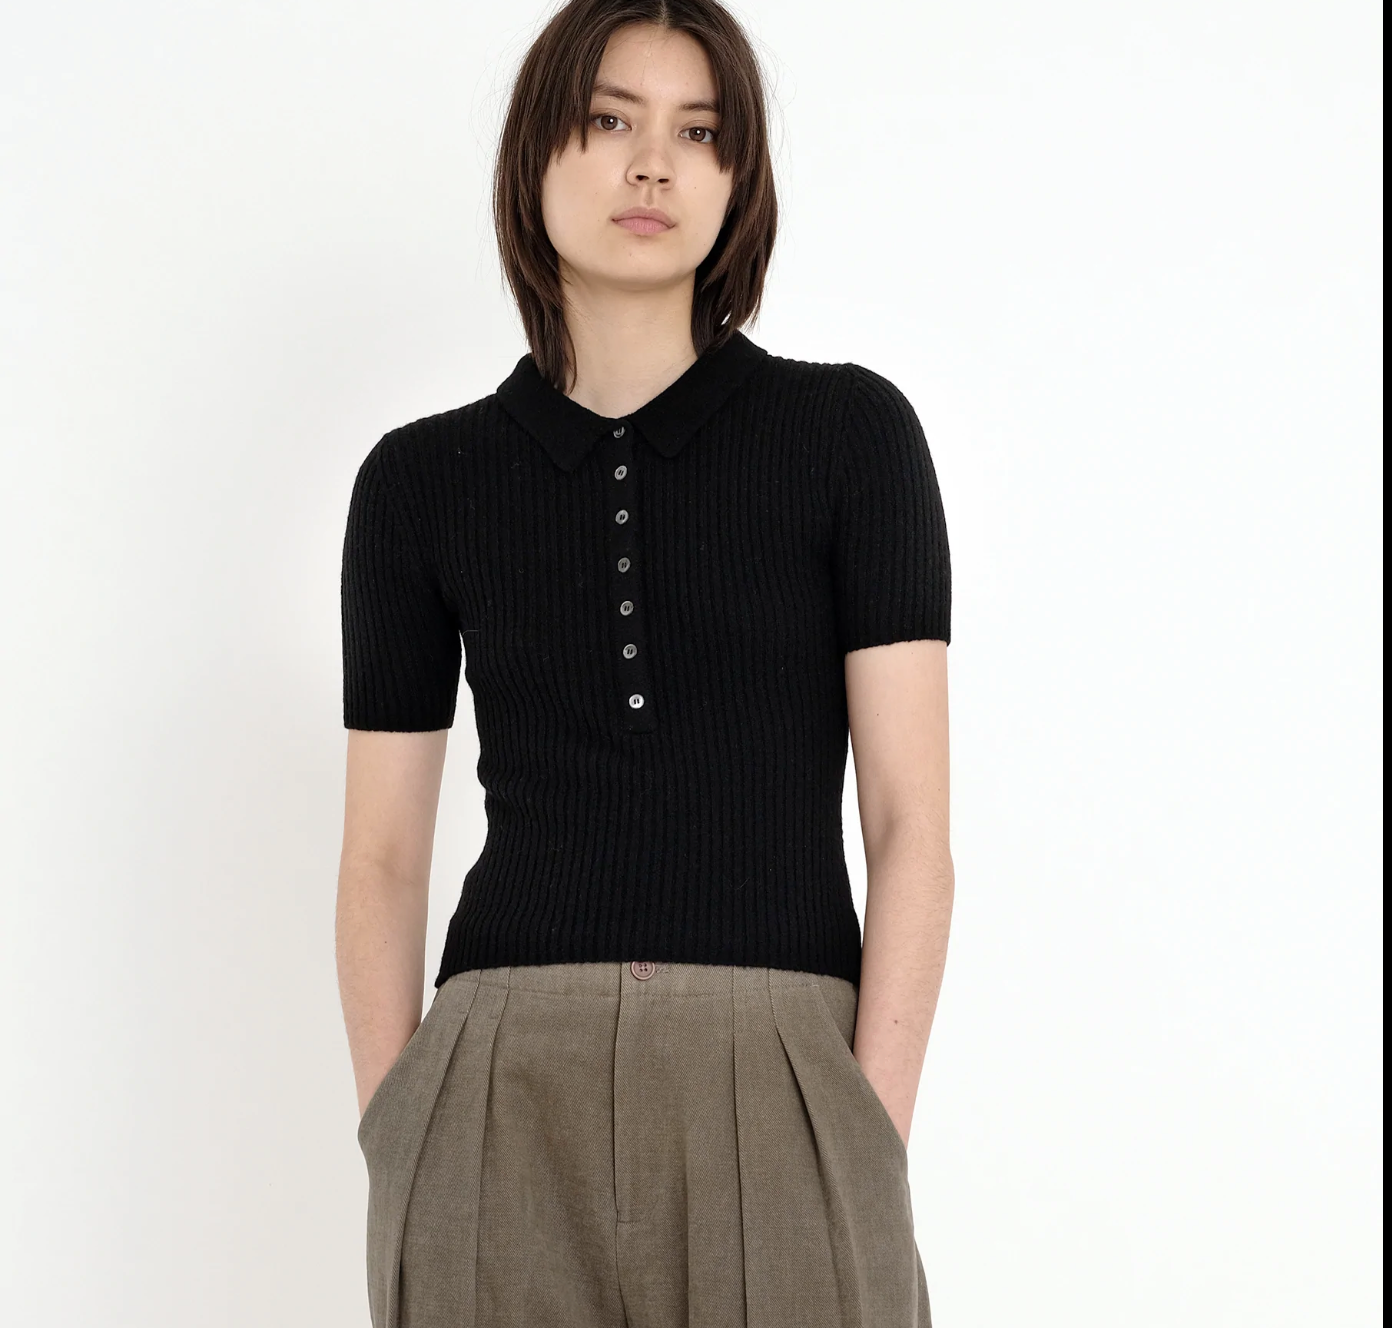 molly collared short sleeves top